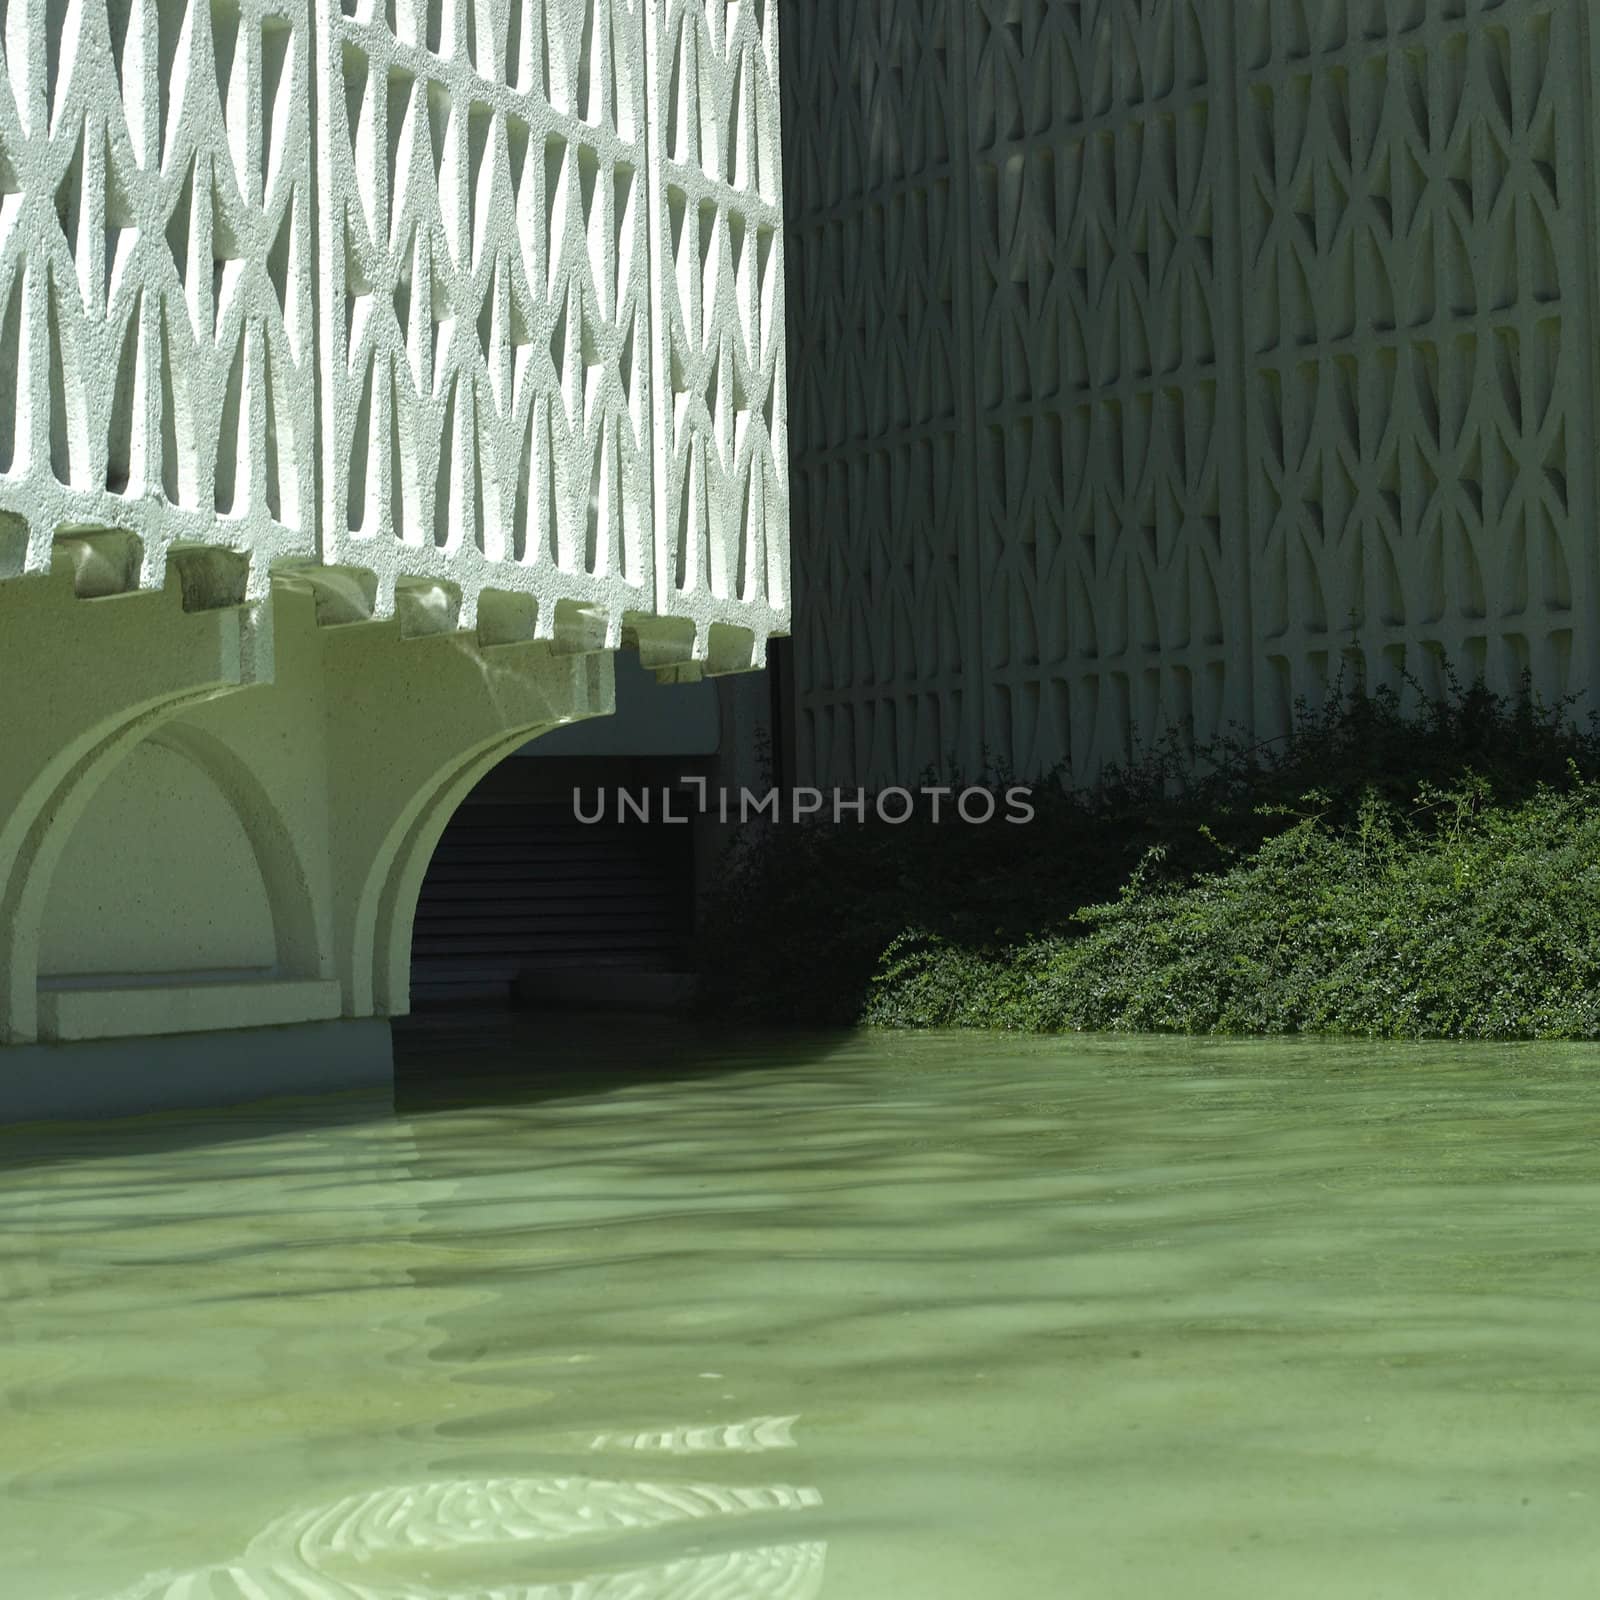 White patterned wall and water